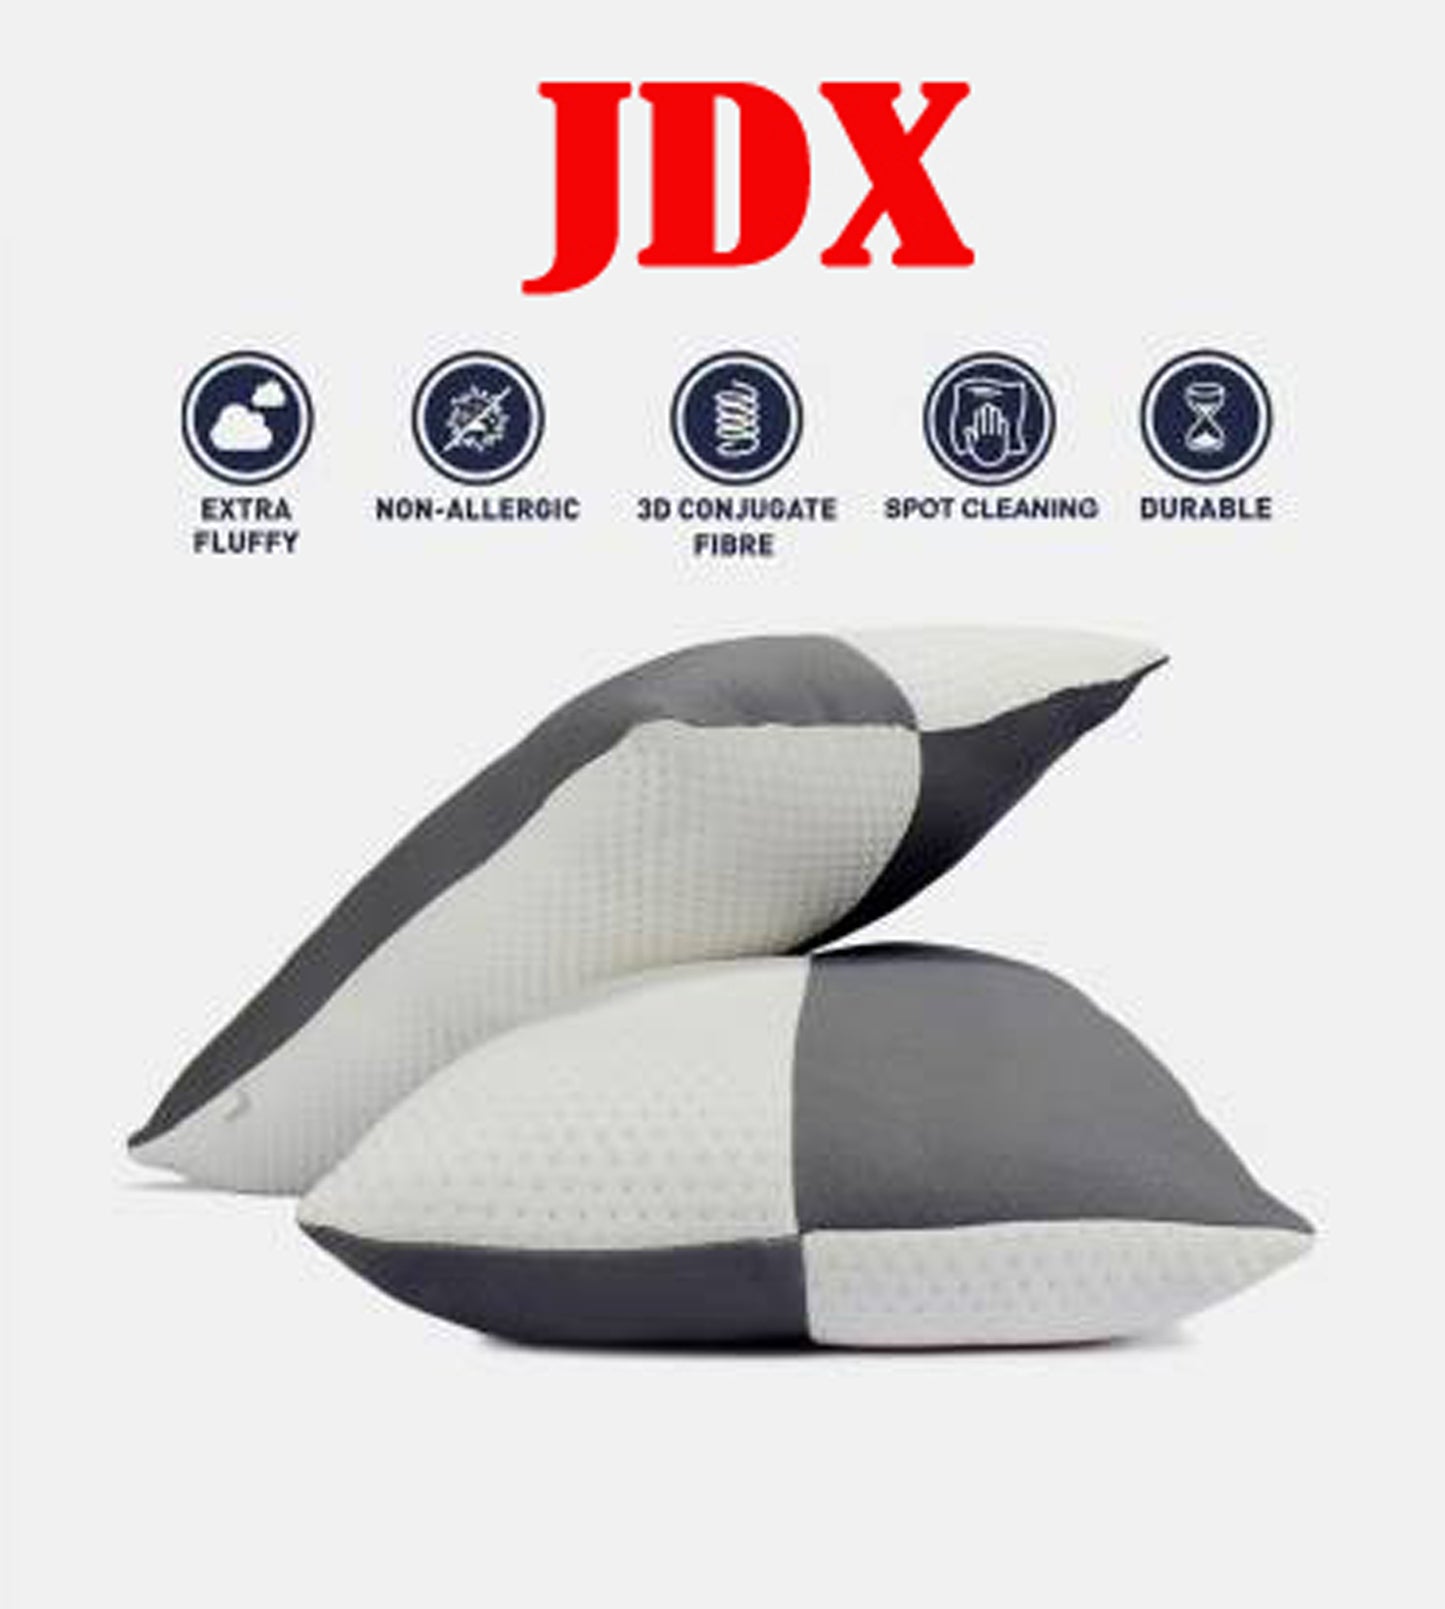 JDX Luxury 16x24 Inch Grey and White Microfibre Geometric Sleeping Pillow Pack of 2  (White, Grey)